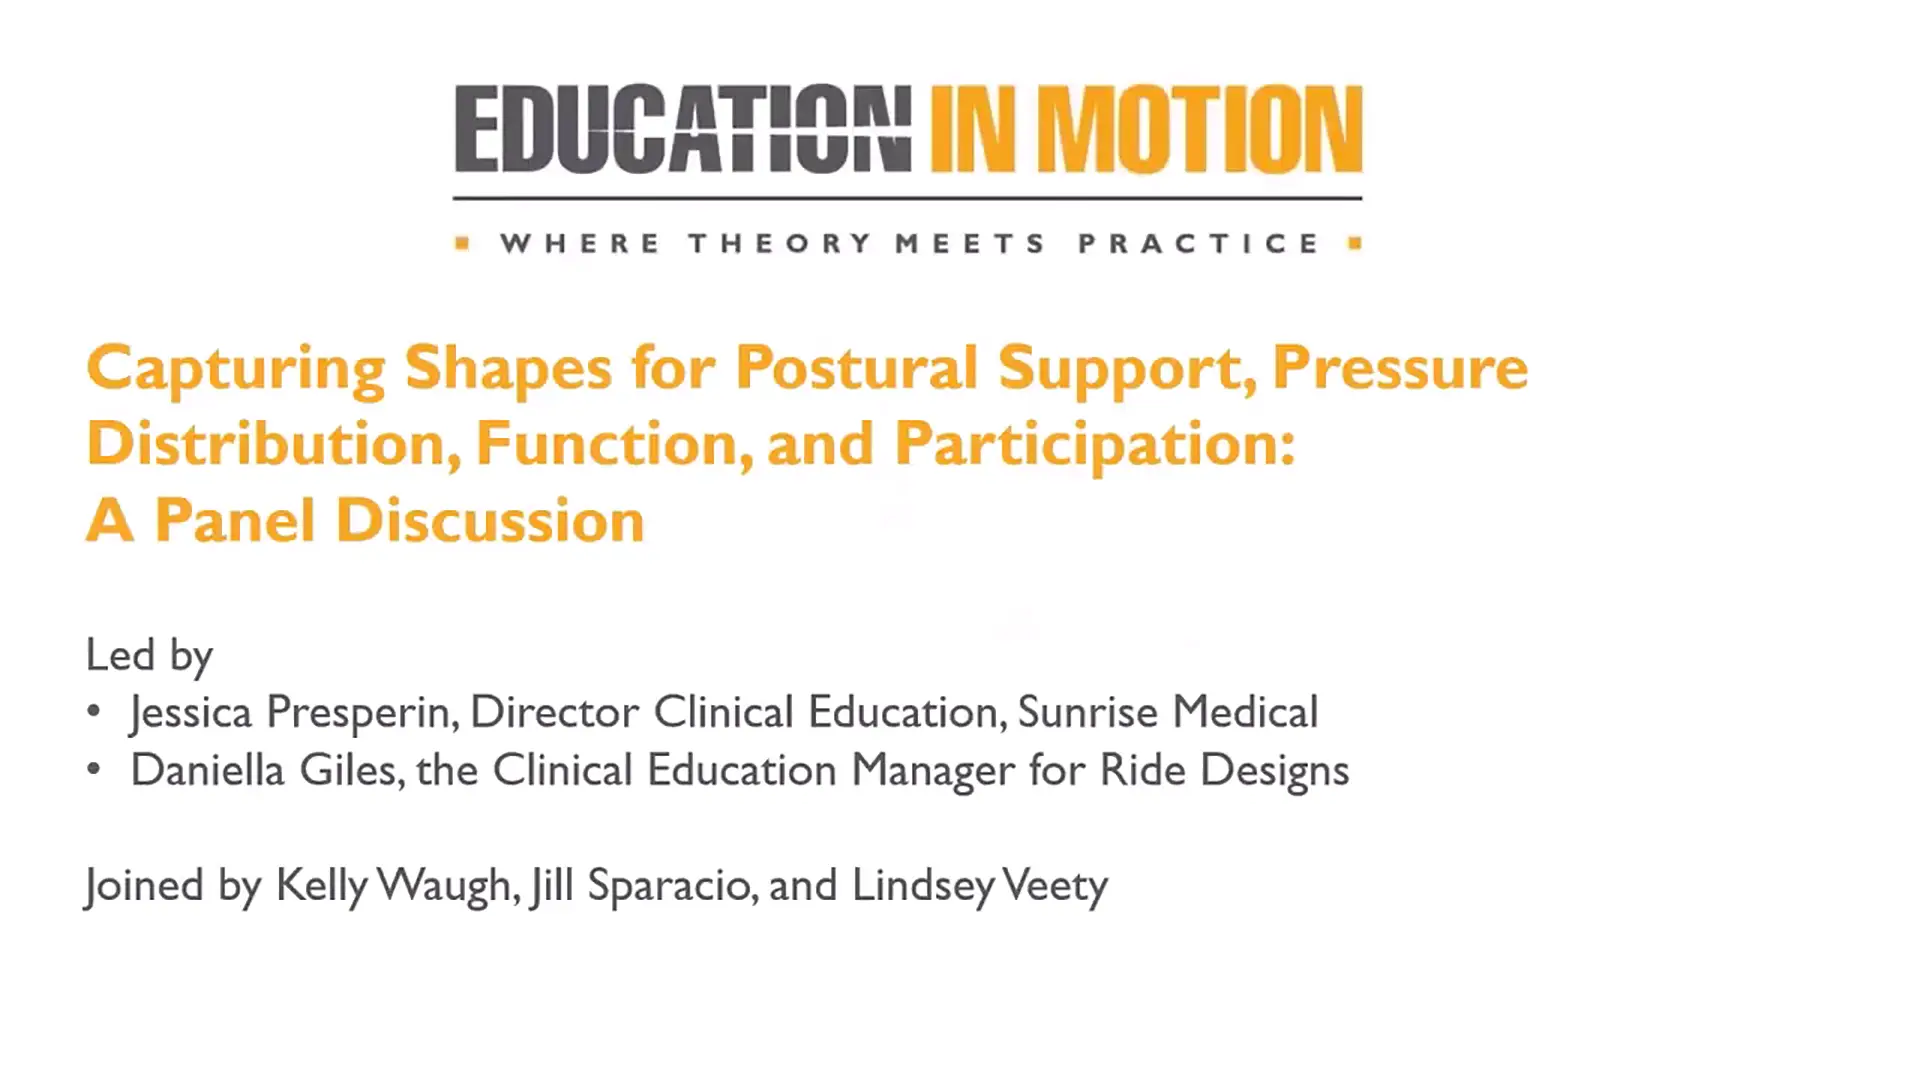 Capturing Shapes for Postural Support, Pressure Distribution, Function, and Participation